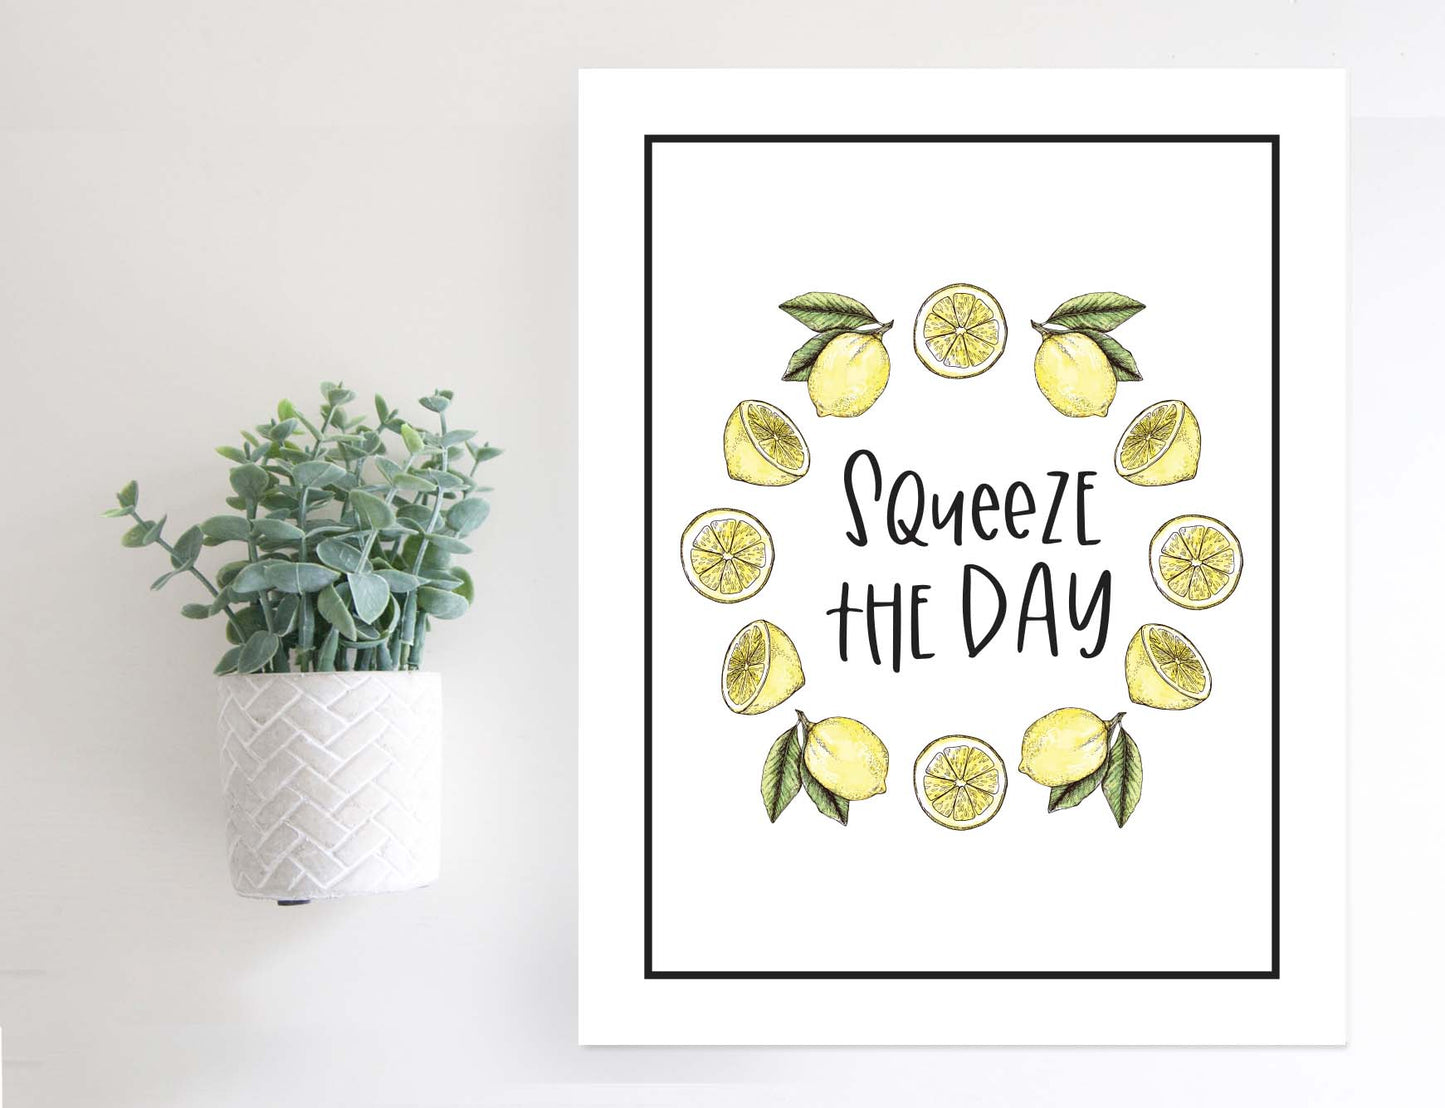 Magnetic Wall Hanging Insert: Squeeze the Day (Summer) | INSERT ONLY